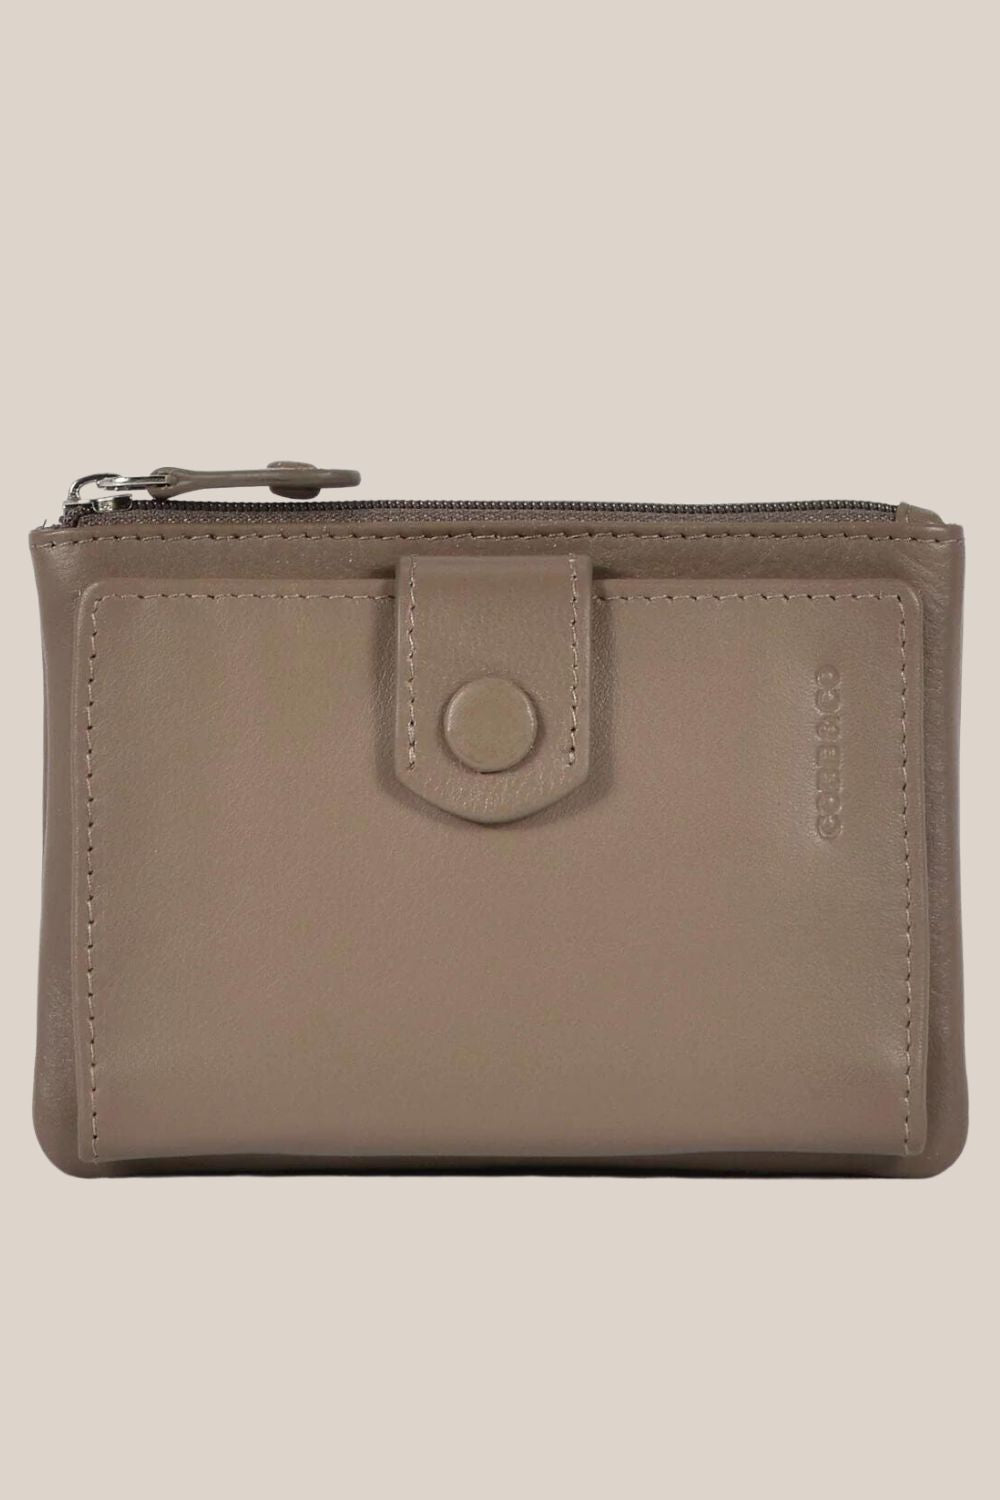 Cobb & Co Collins RFID Compact Leather Wallet